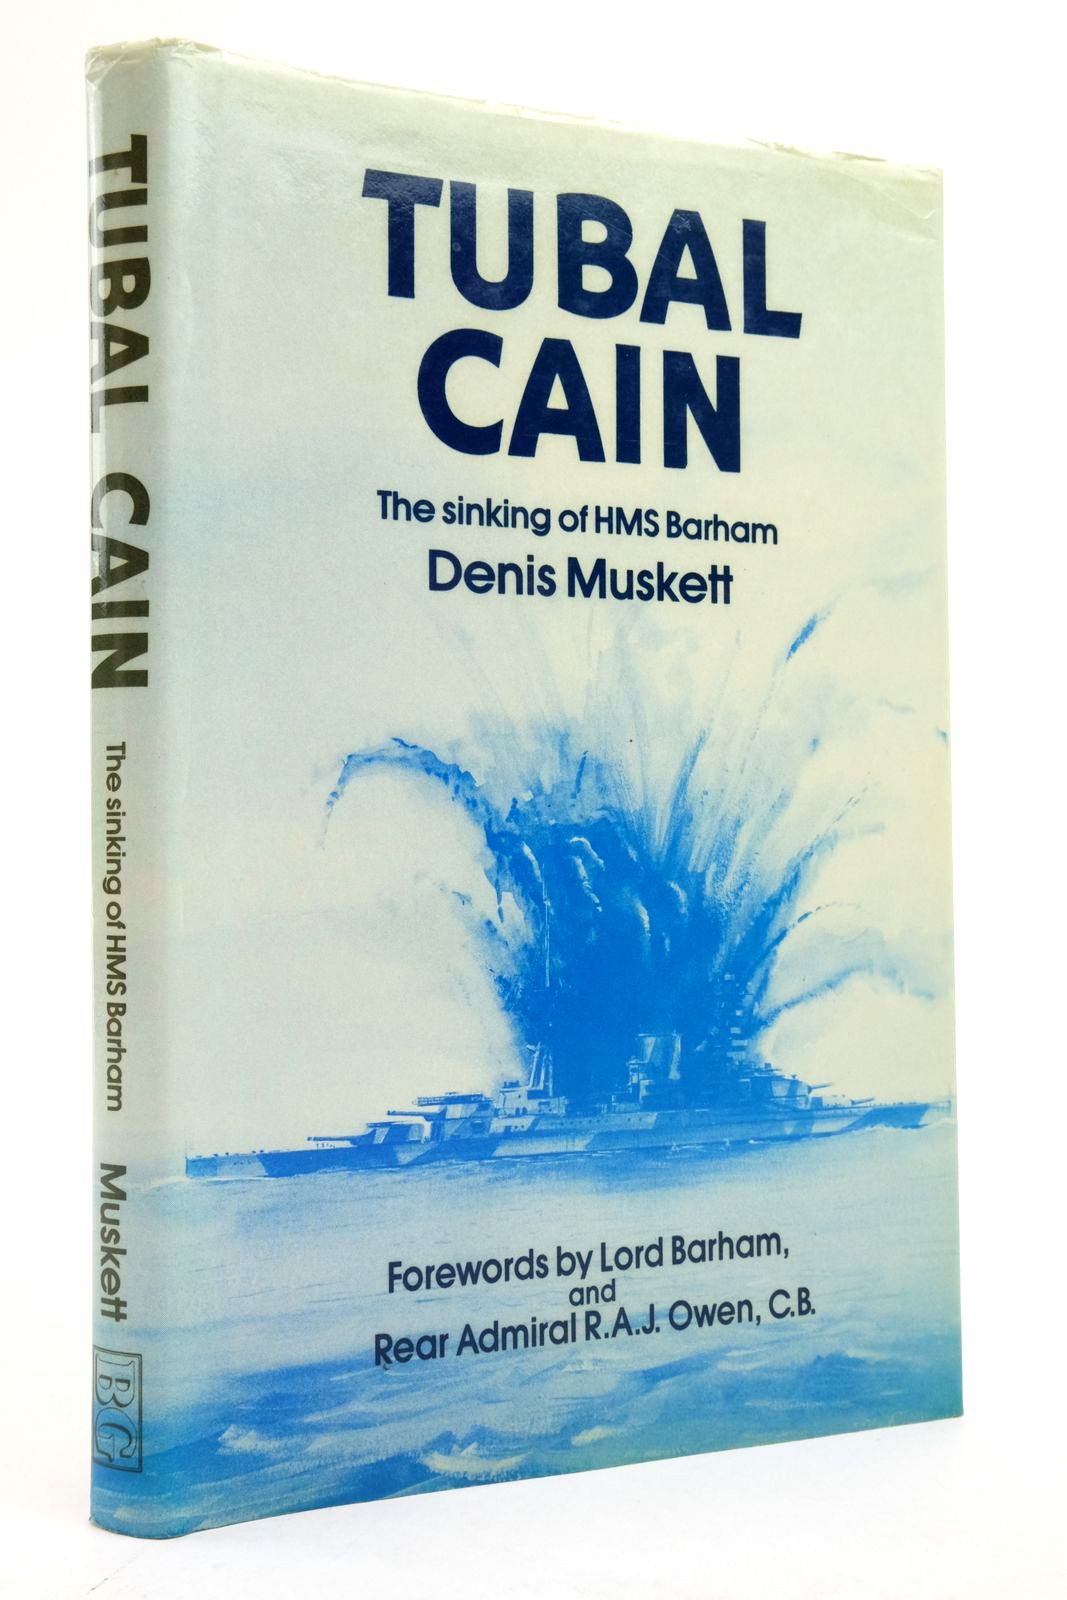 Photo of TUBAL CAIN: THE SINKING OF HMS BARHAM written by Muskett, Denis published by The Book Guild Ltd. (STOCK CODE: 2138565)  for sale by Stella & Rose's Books